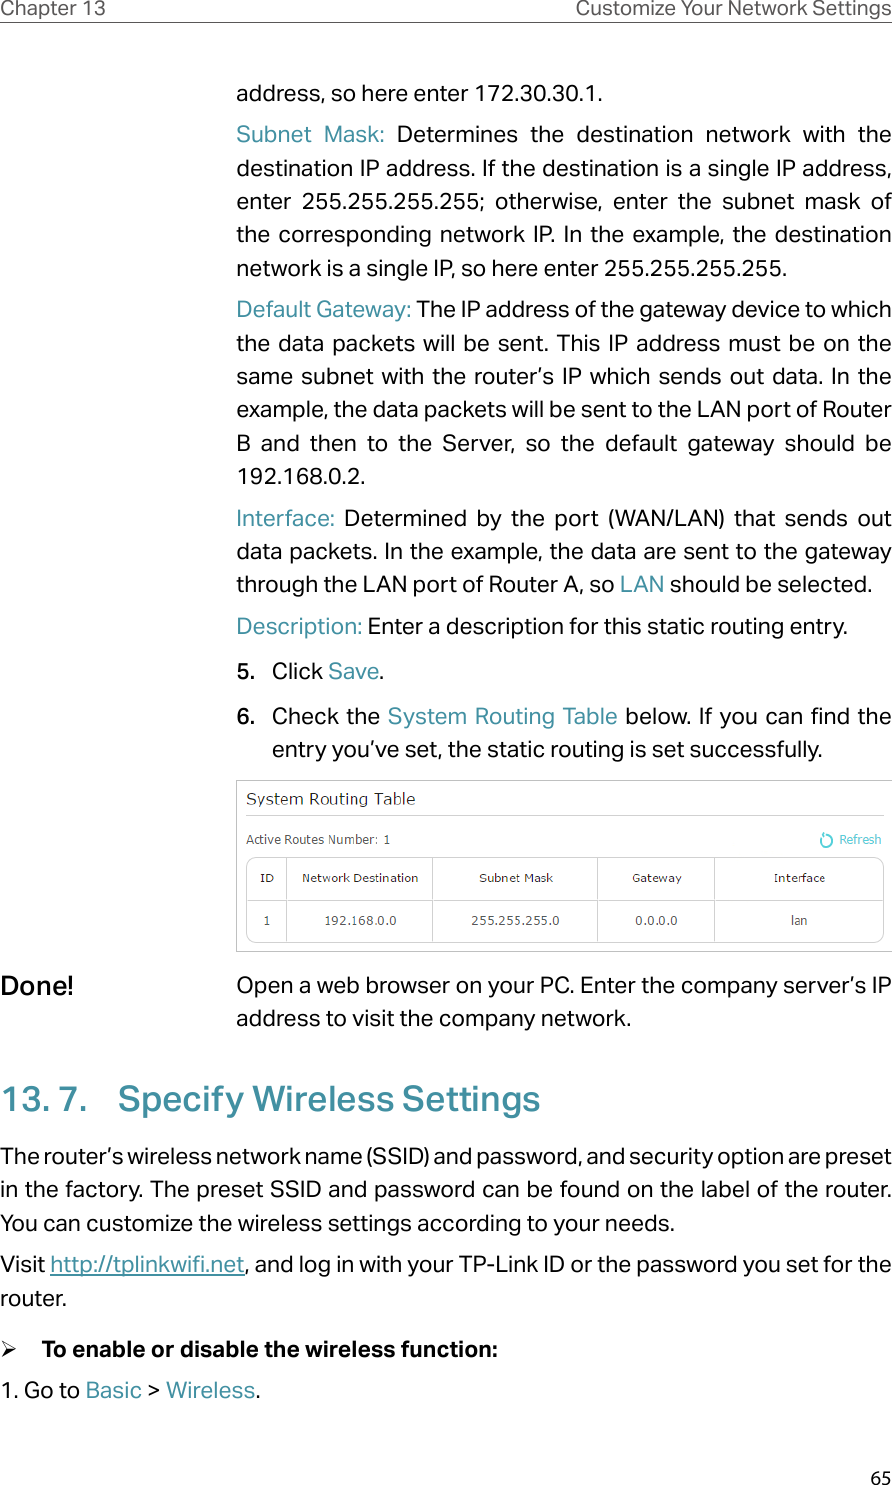 Page 14 of TP Link Technologies A10 AC2300 Wireless MU-MIMO Gigabit Router User Manual Part2